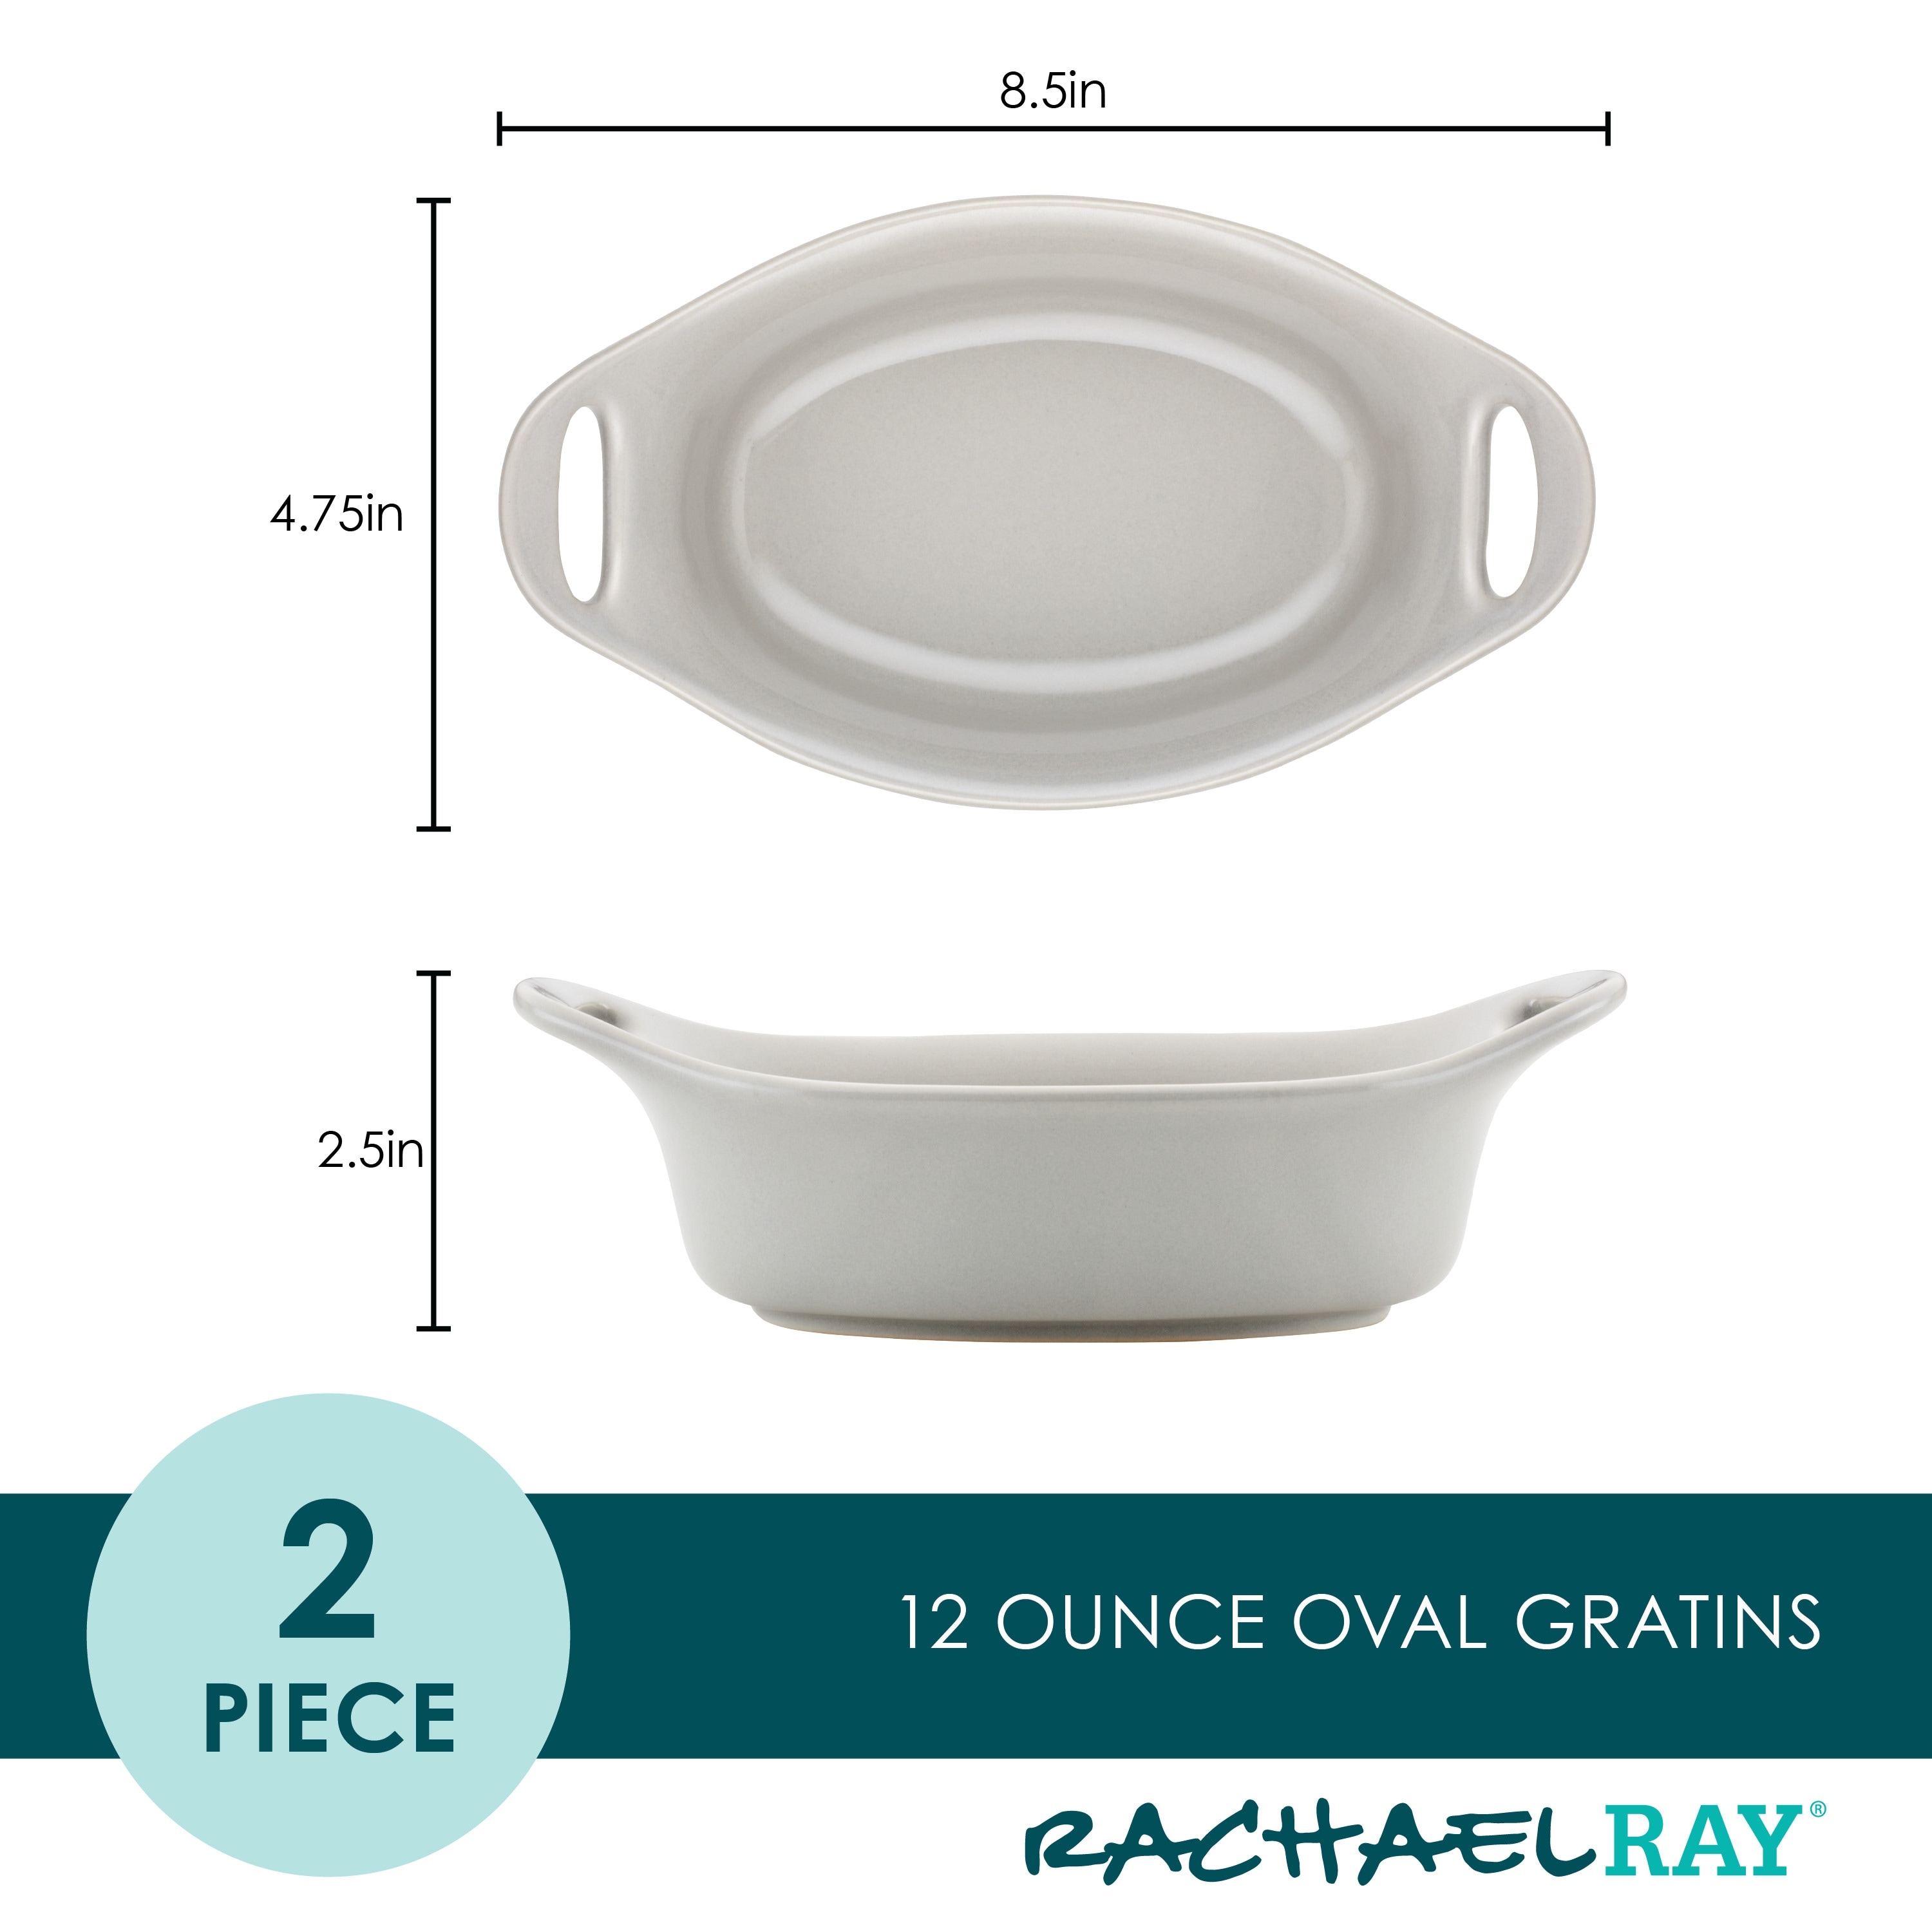 https://ak1.ostkcdn.com/images/products/is/images/direct/8ebe679ecf260fd1035856149fb152006a1f8369/Rachael-Ray-Ceramics-Oval-Au-Gratin-Set%2C-2-Piece%2C-Agave-Blue.jpg